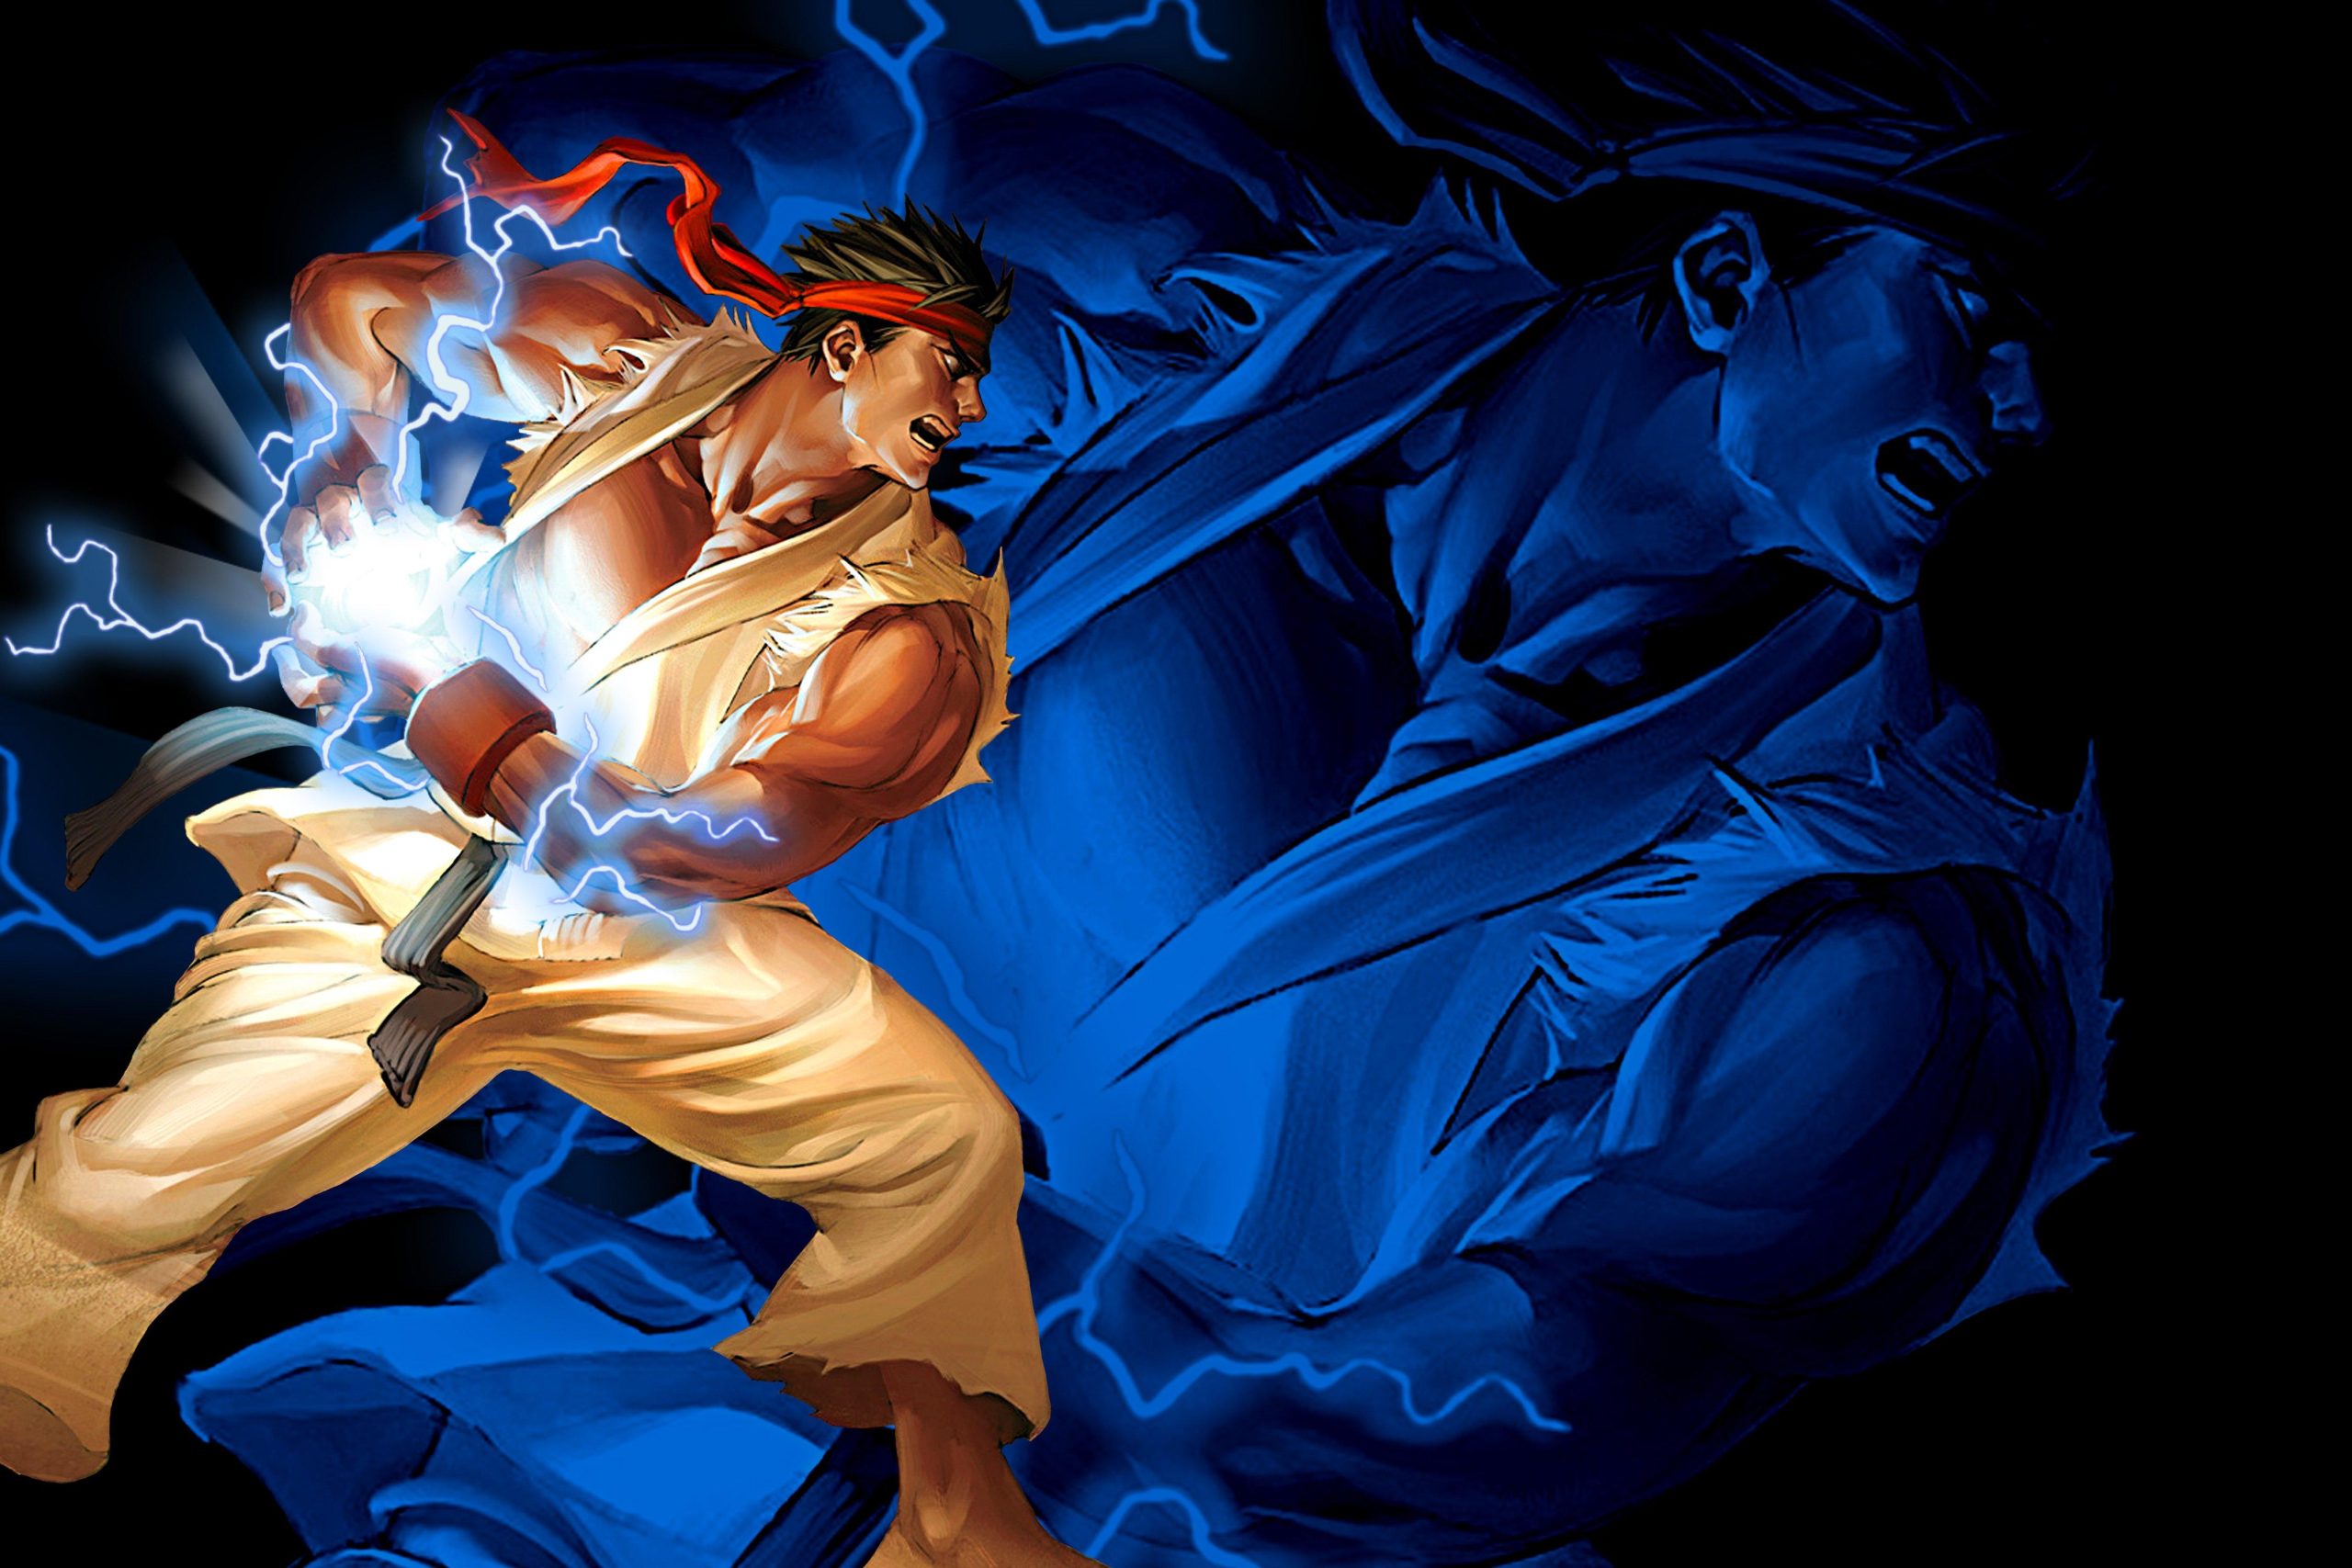 Street Fighter Ryu Wallpaper For Ipad, Street Fighter Ryu, Game